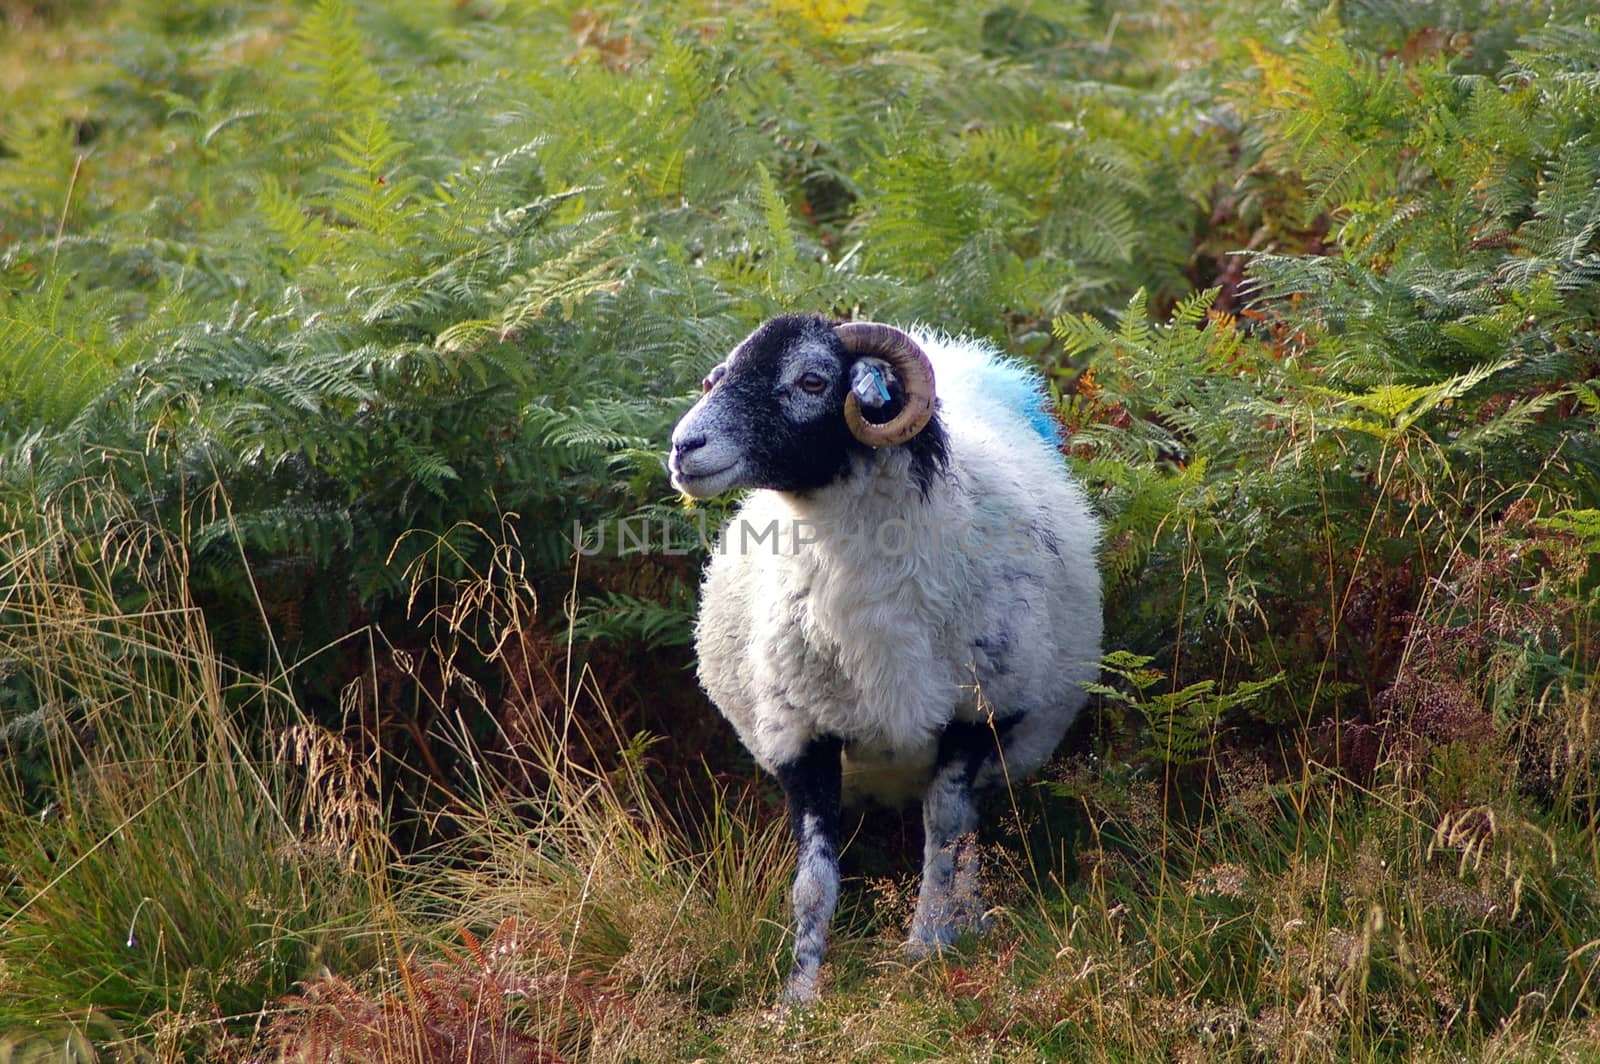 Sheep showing its preferred profile for a picture amid the ferns by the side of a road in the Yorkshire Dales